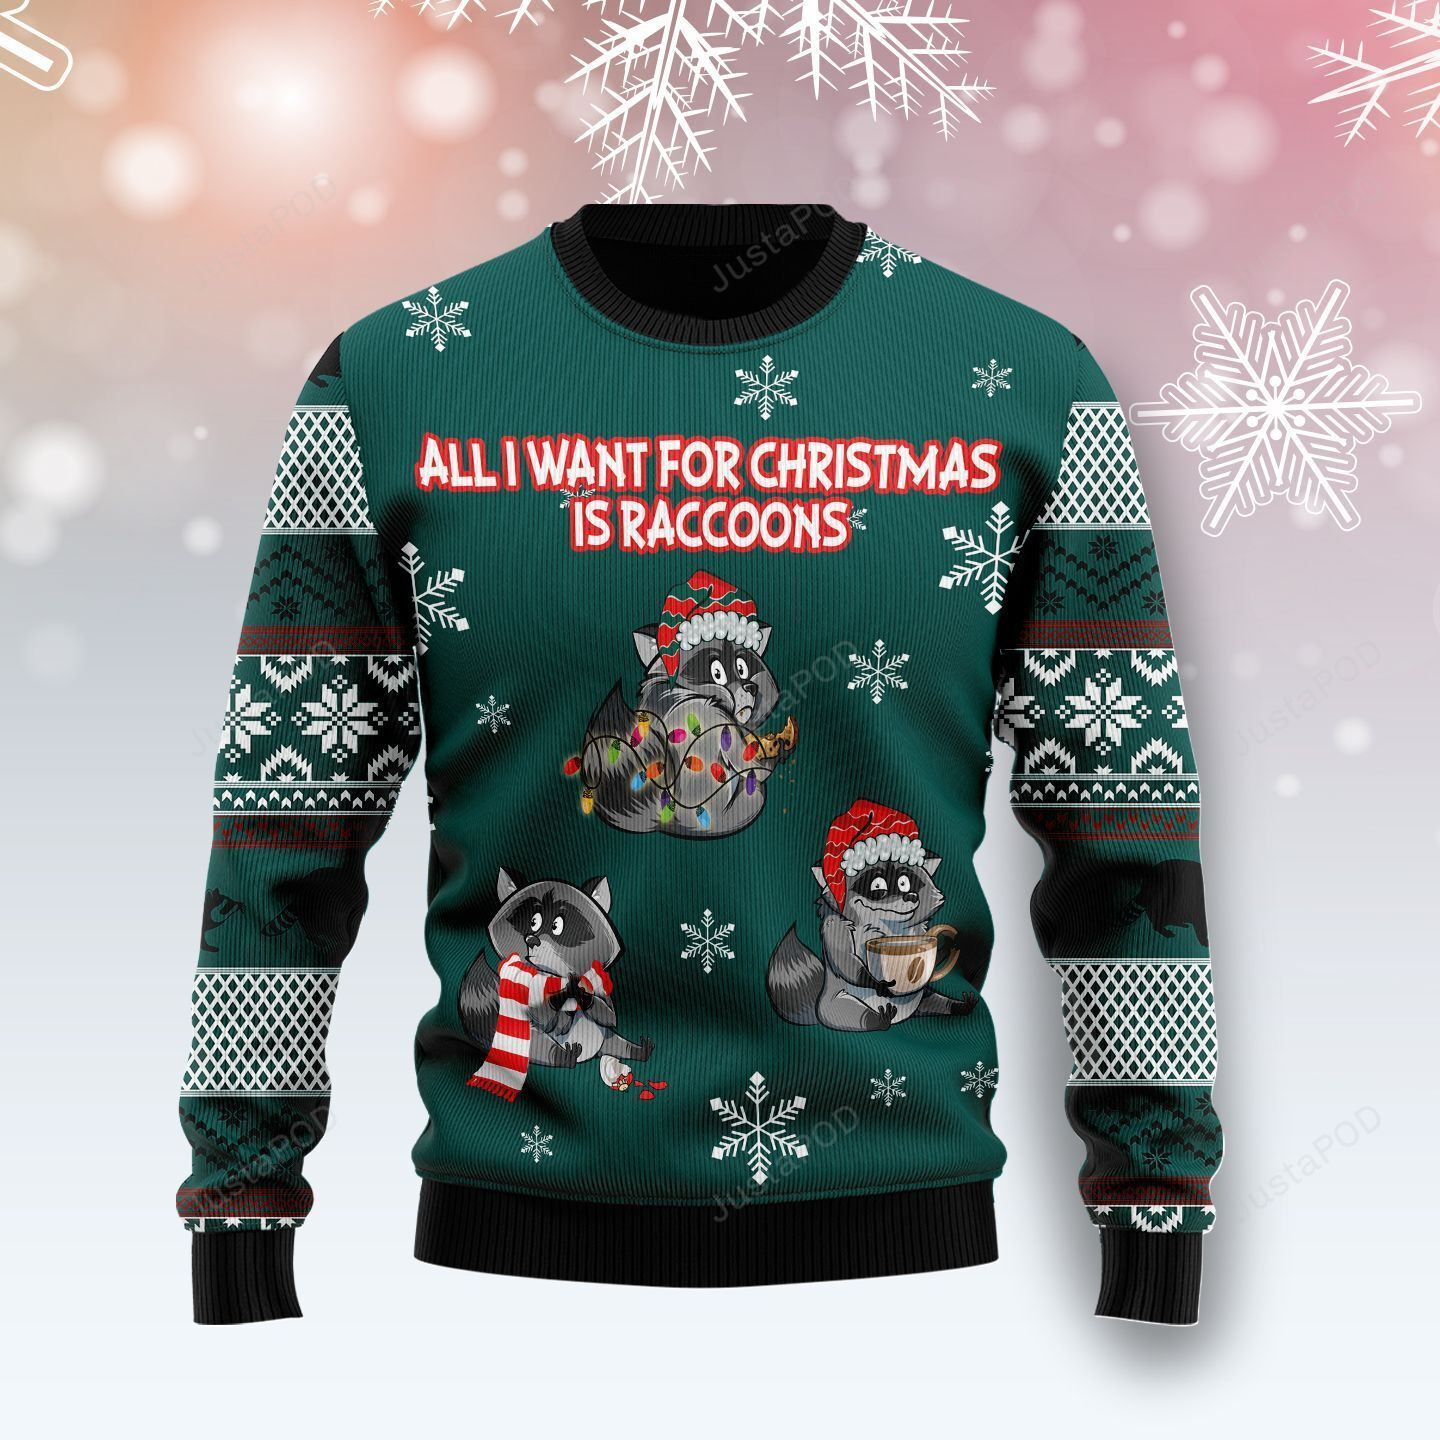 Buy All I Want For Christmas Is Raccoons Ugly Christmas Sweater - HomeFavo